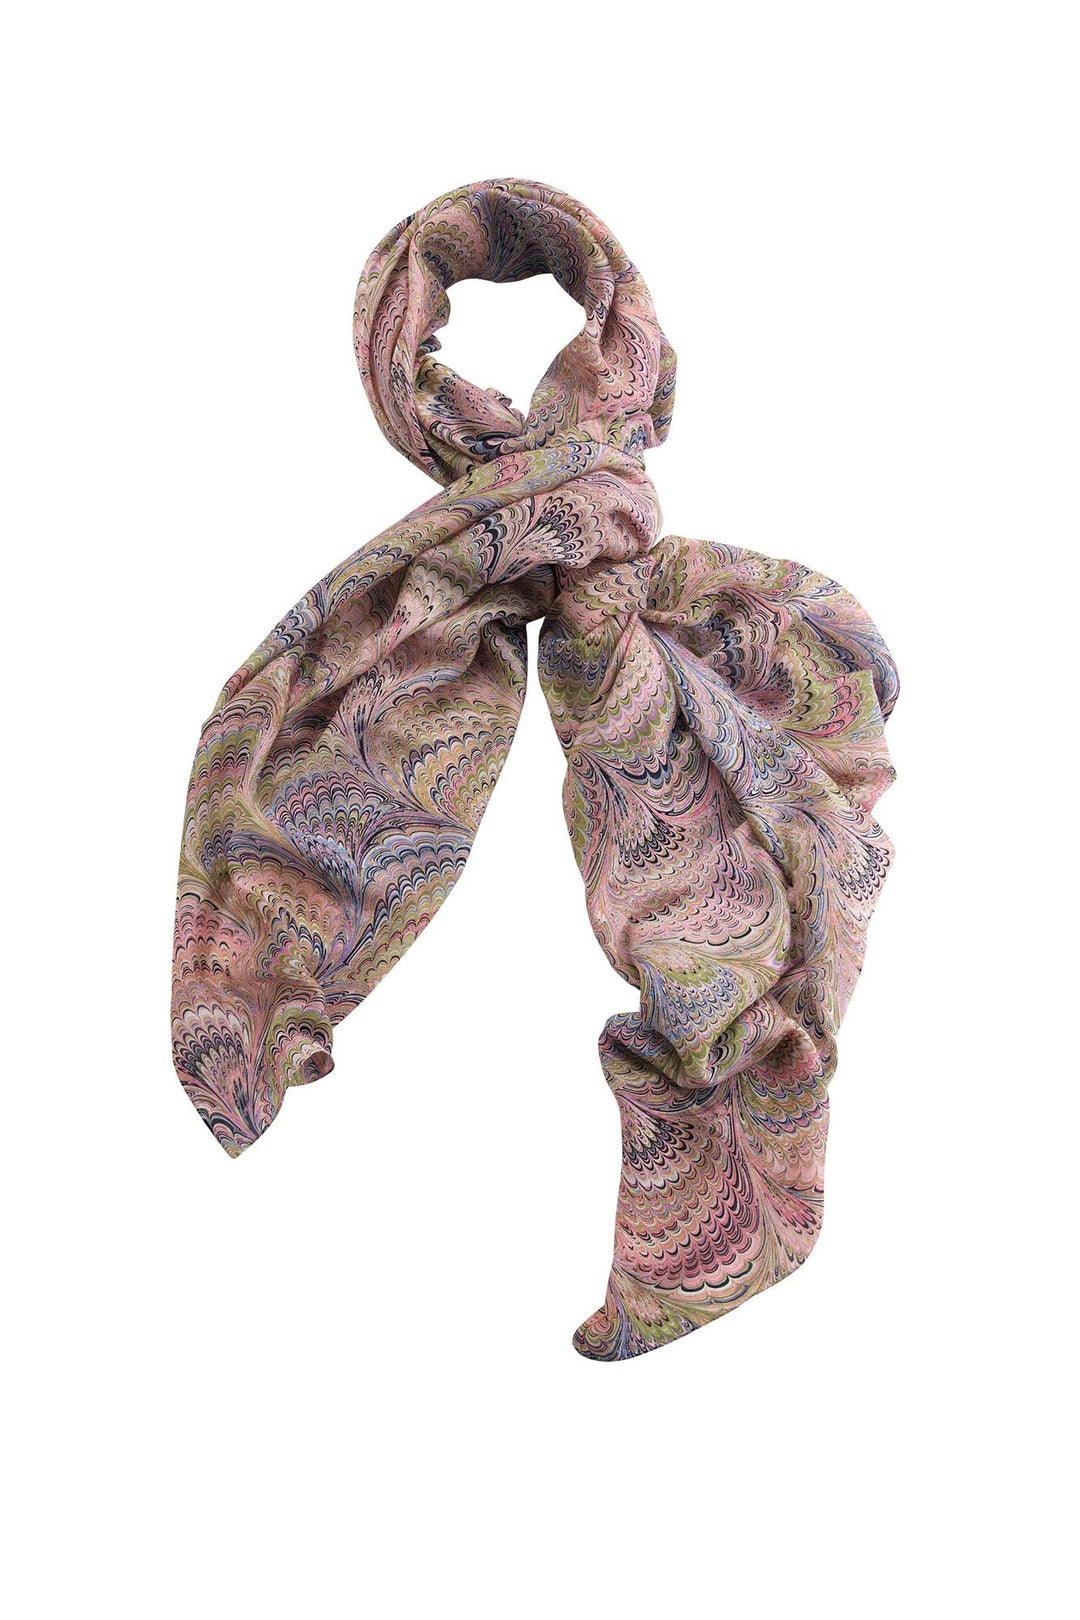 Marbled Pink Scarf - One Hundred Stars